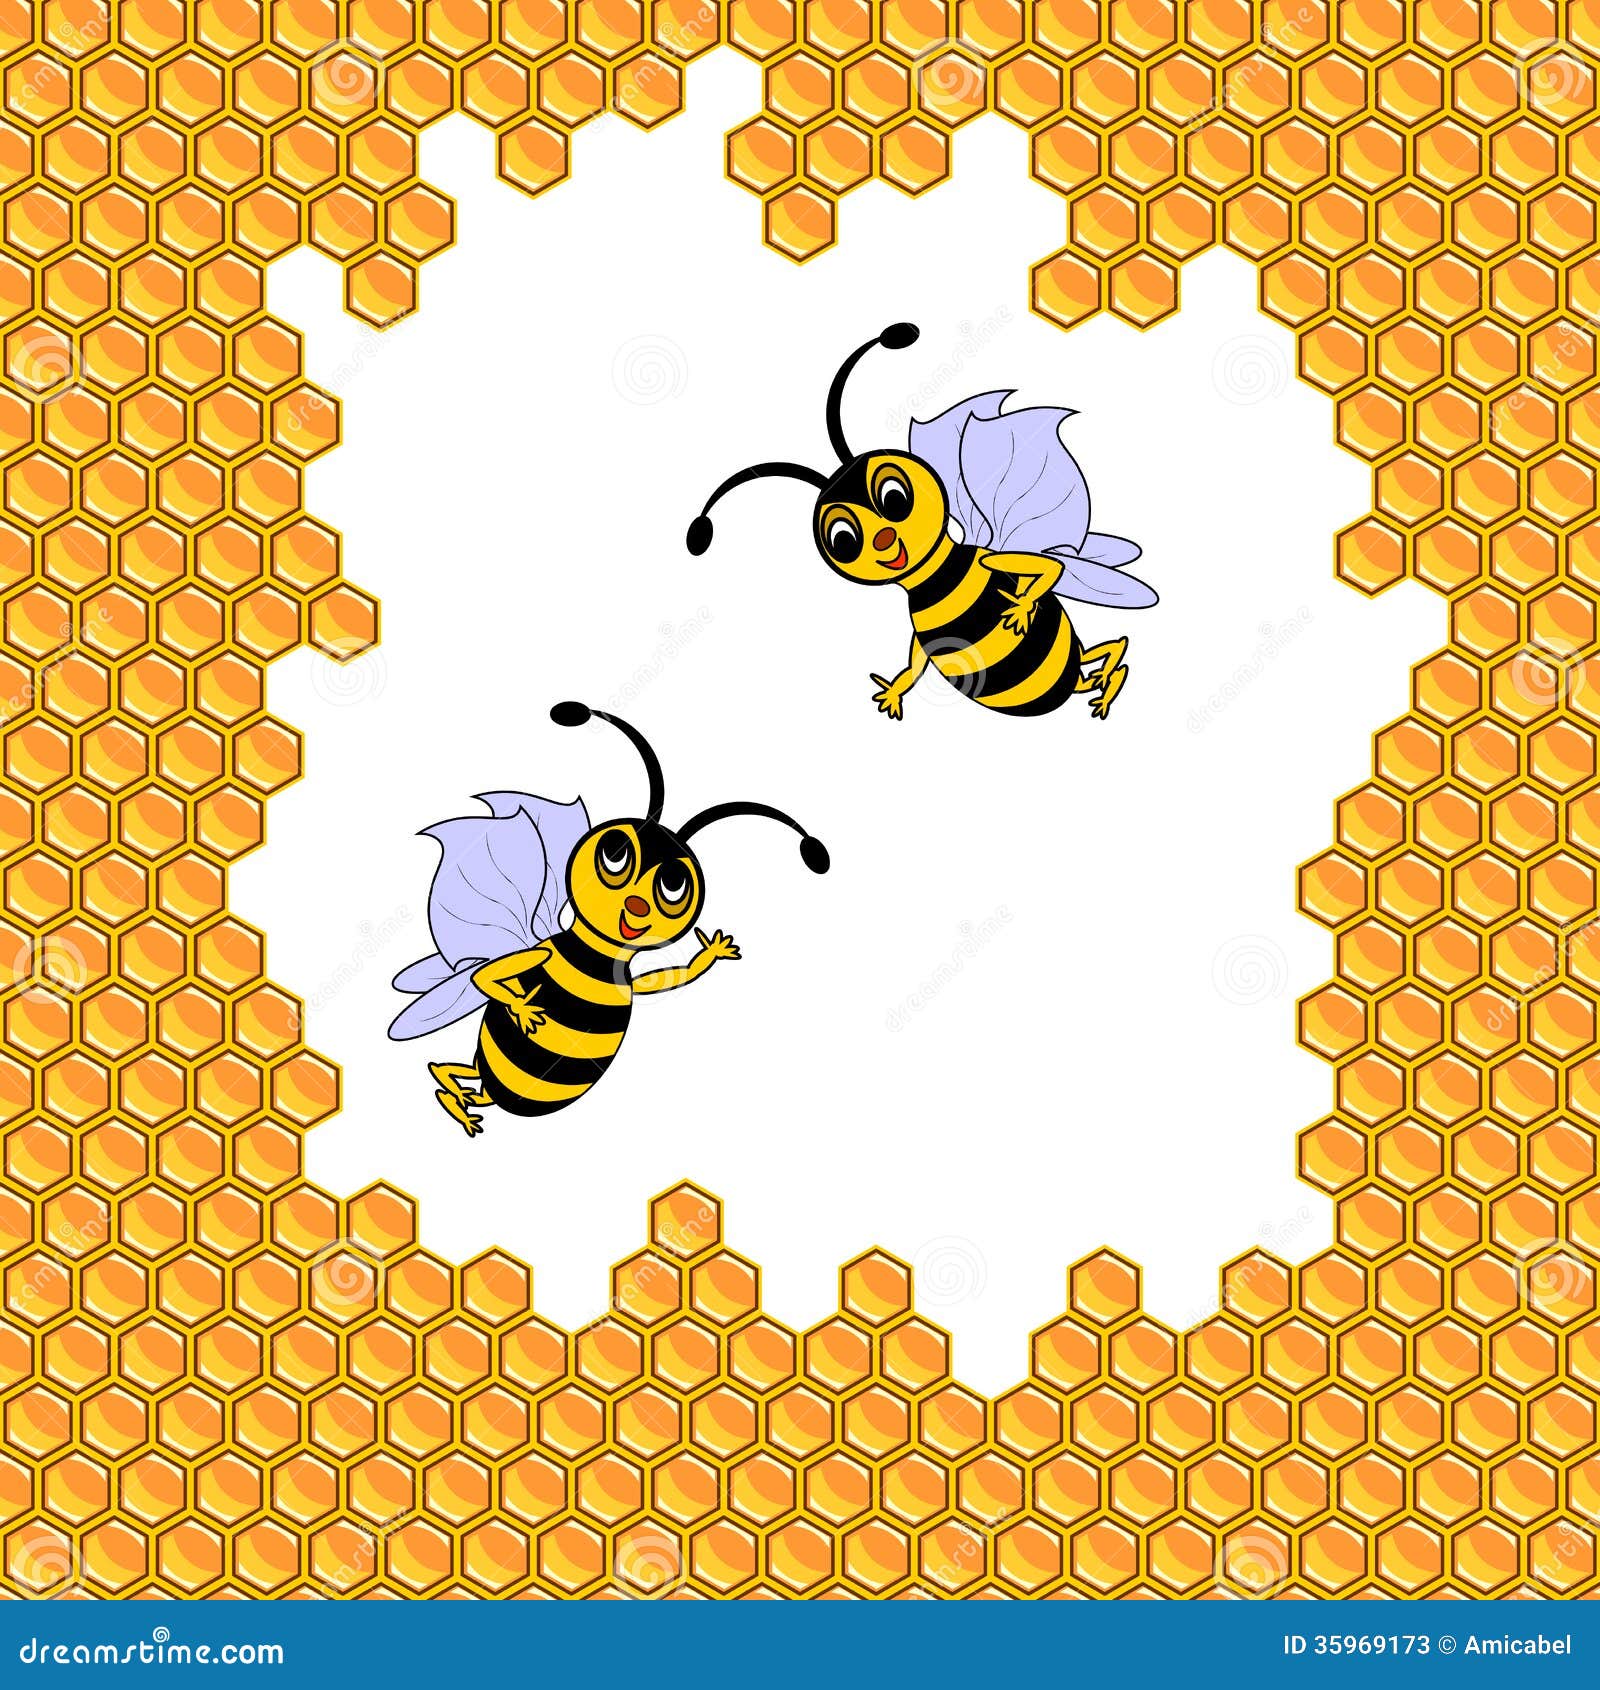 Two Funny Cartoon Bees Surrounded By Honeycombs Stock Photos - Image